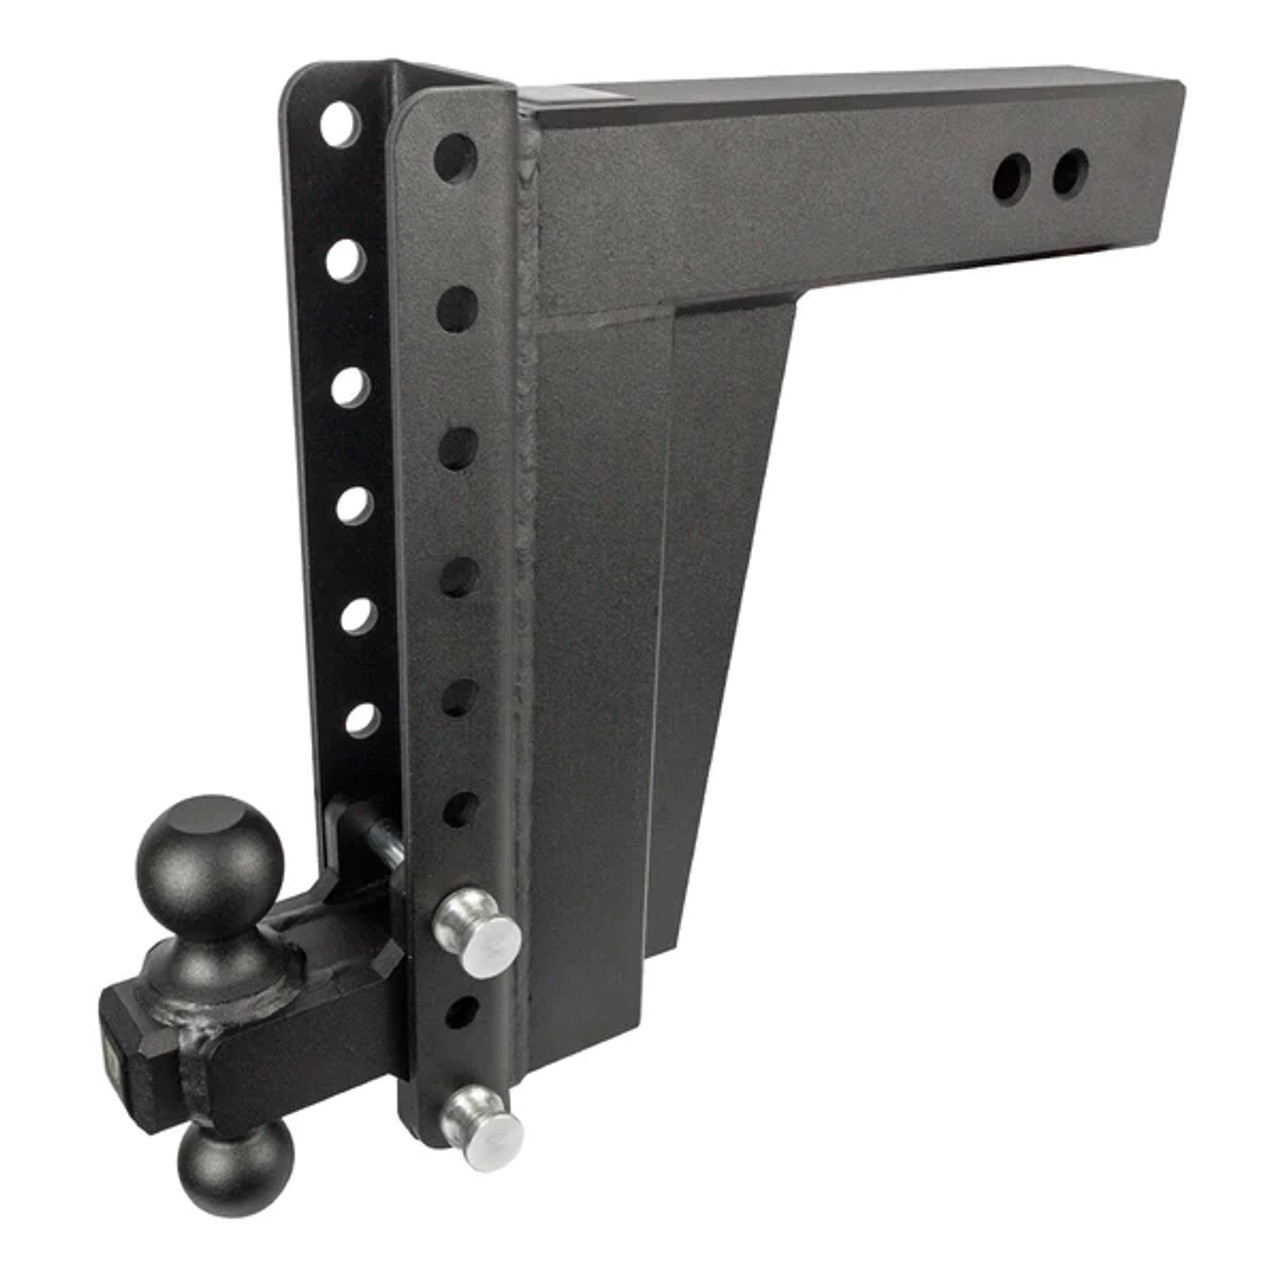 BPED3012 --- Dual-Ball Seven Position 3" Shank Extreme Duty Hitch - 36k